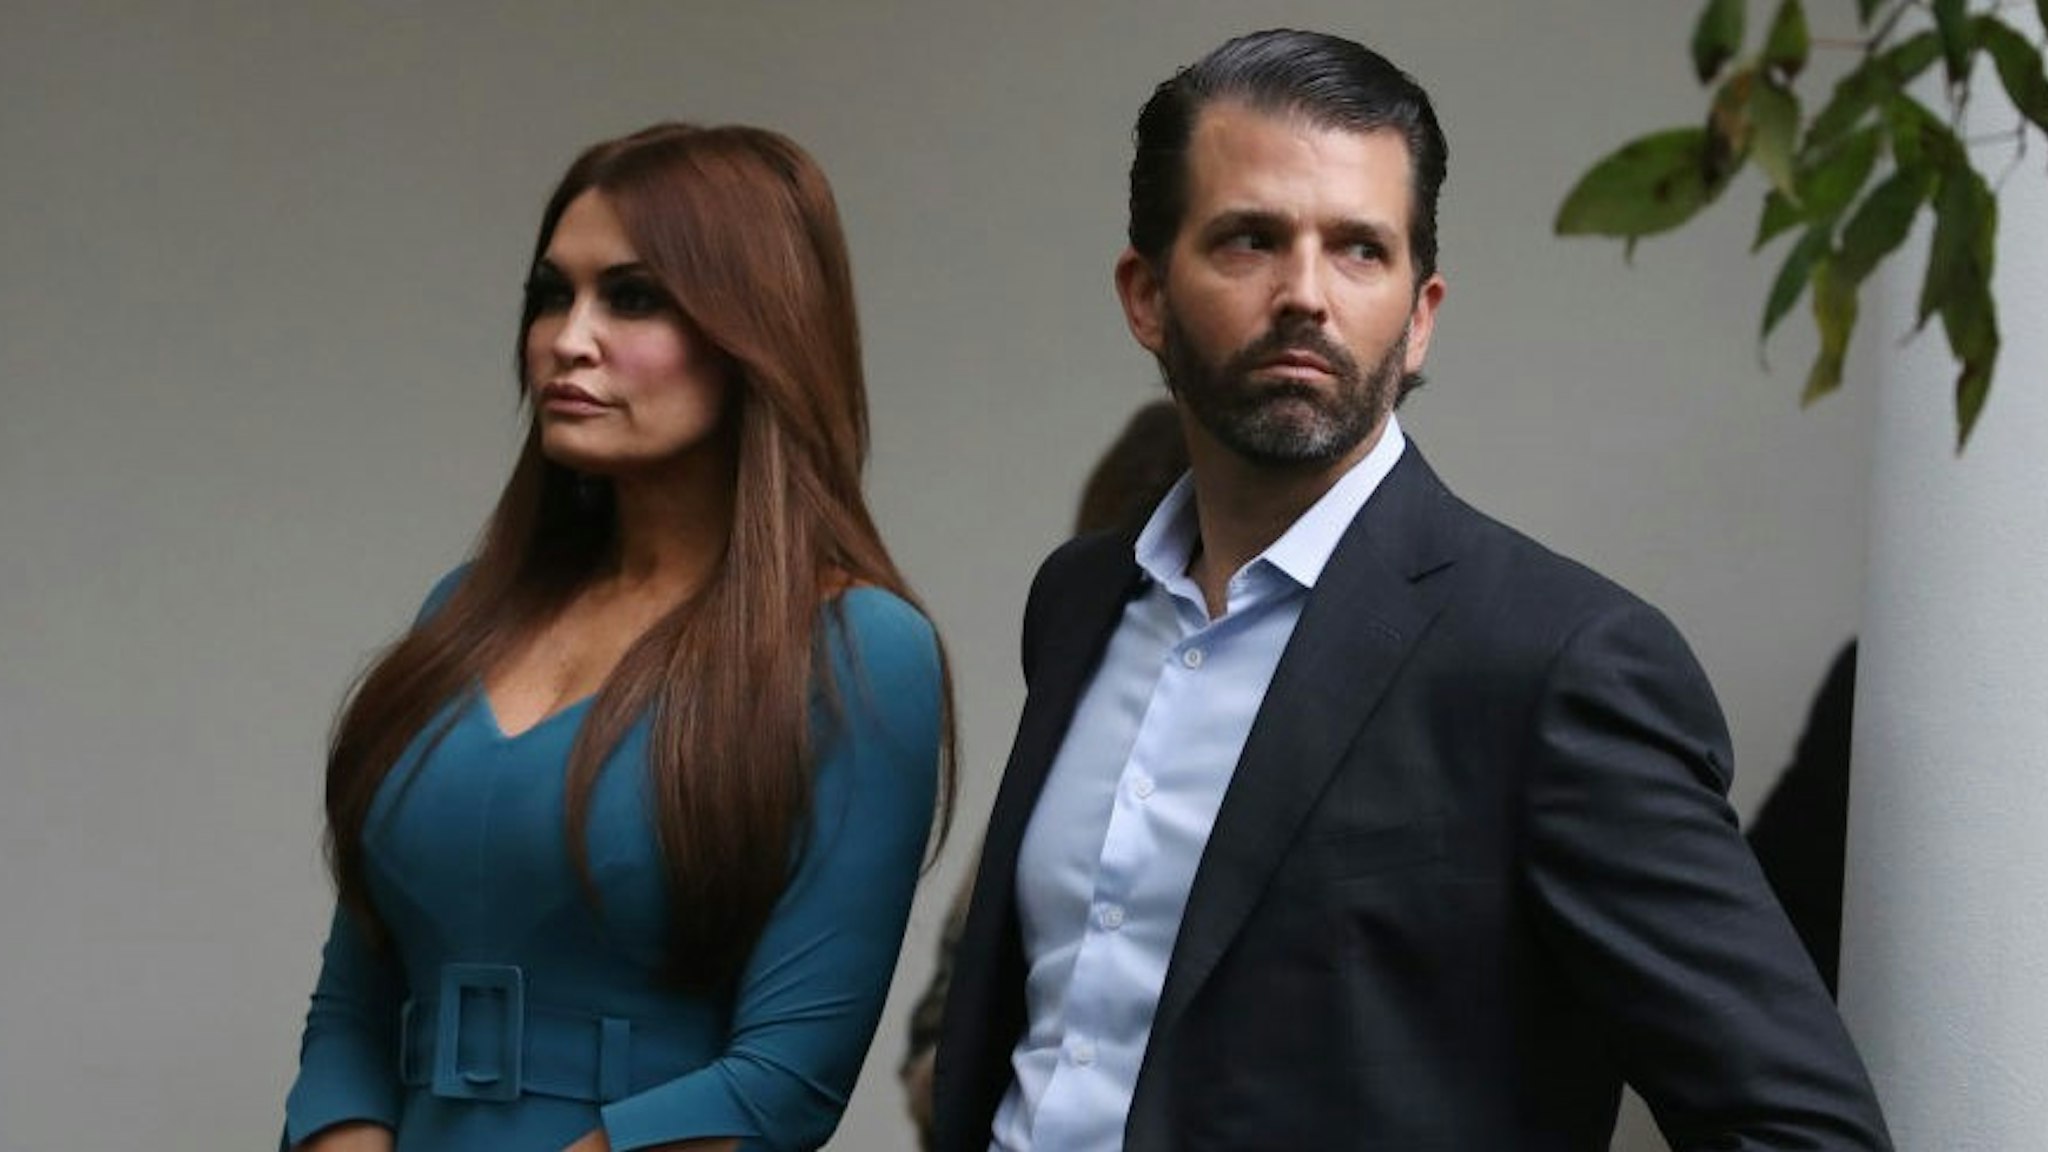 WASHINGTON, DC - JULY 11: Donald Trump Jr. and Kimberly Guilfoyle arrive to a press conference on the census by President Trump in the Rose Garden of the White House on July 11, 2019 in Washington, DC. President Trump, who had previously pushed to add a citizenship question to the 2020 census, announced that he would direct the Commerce Department to collect that data in other ways. (Photo by